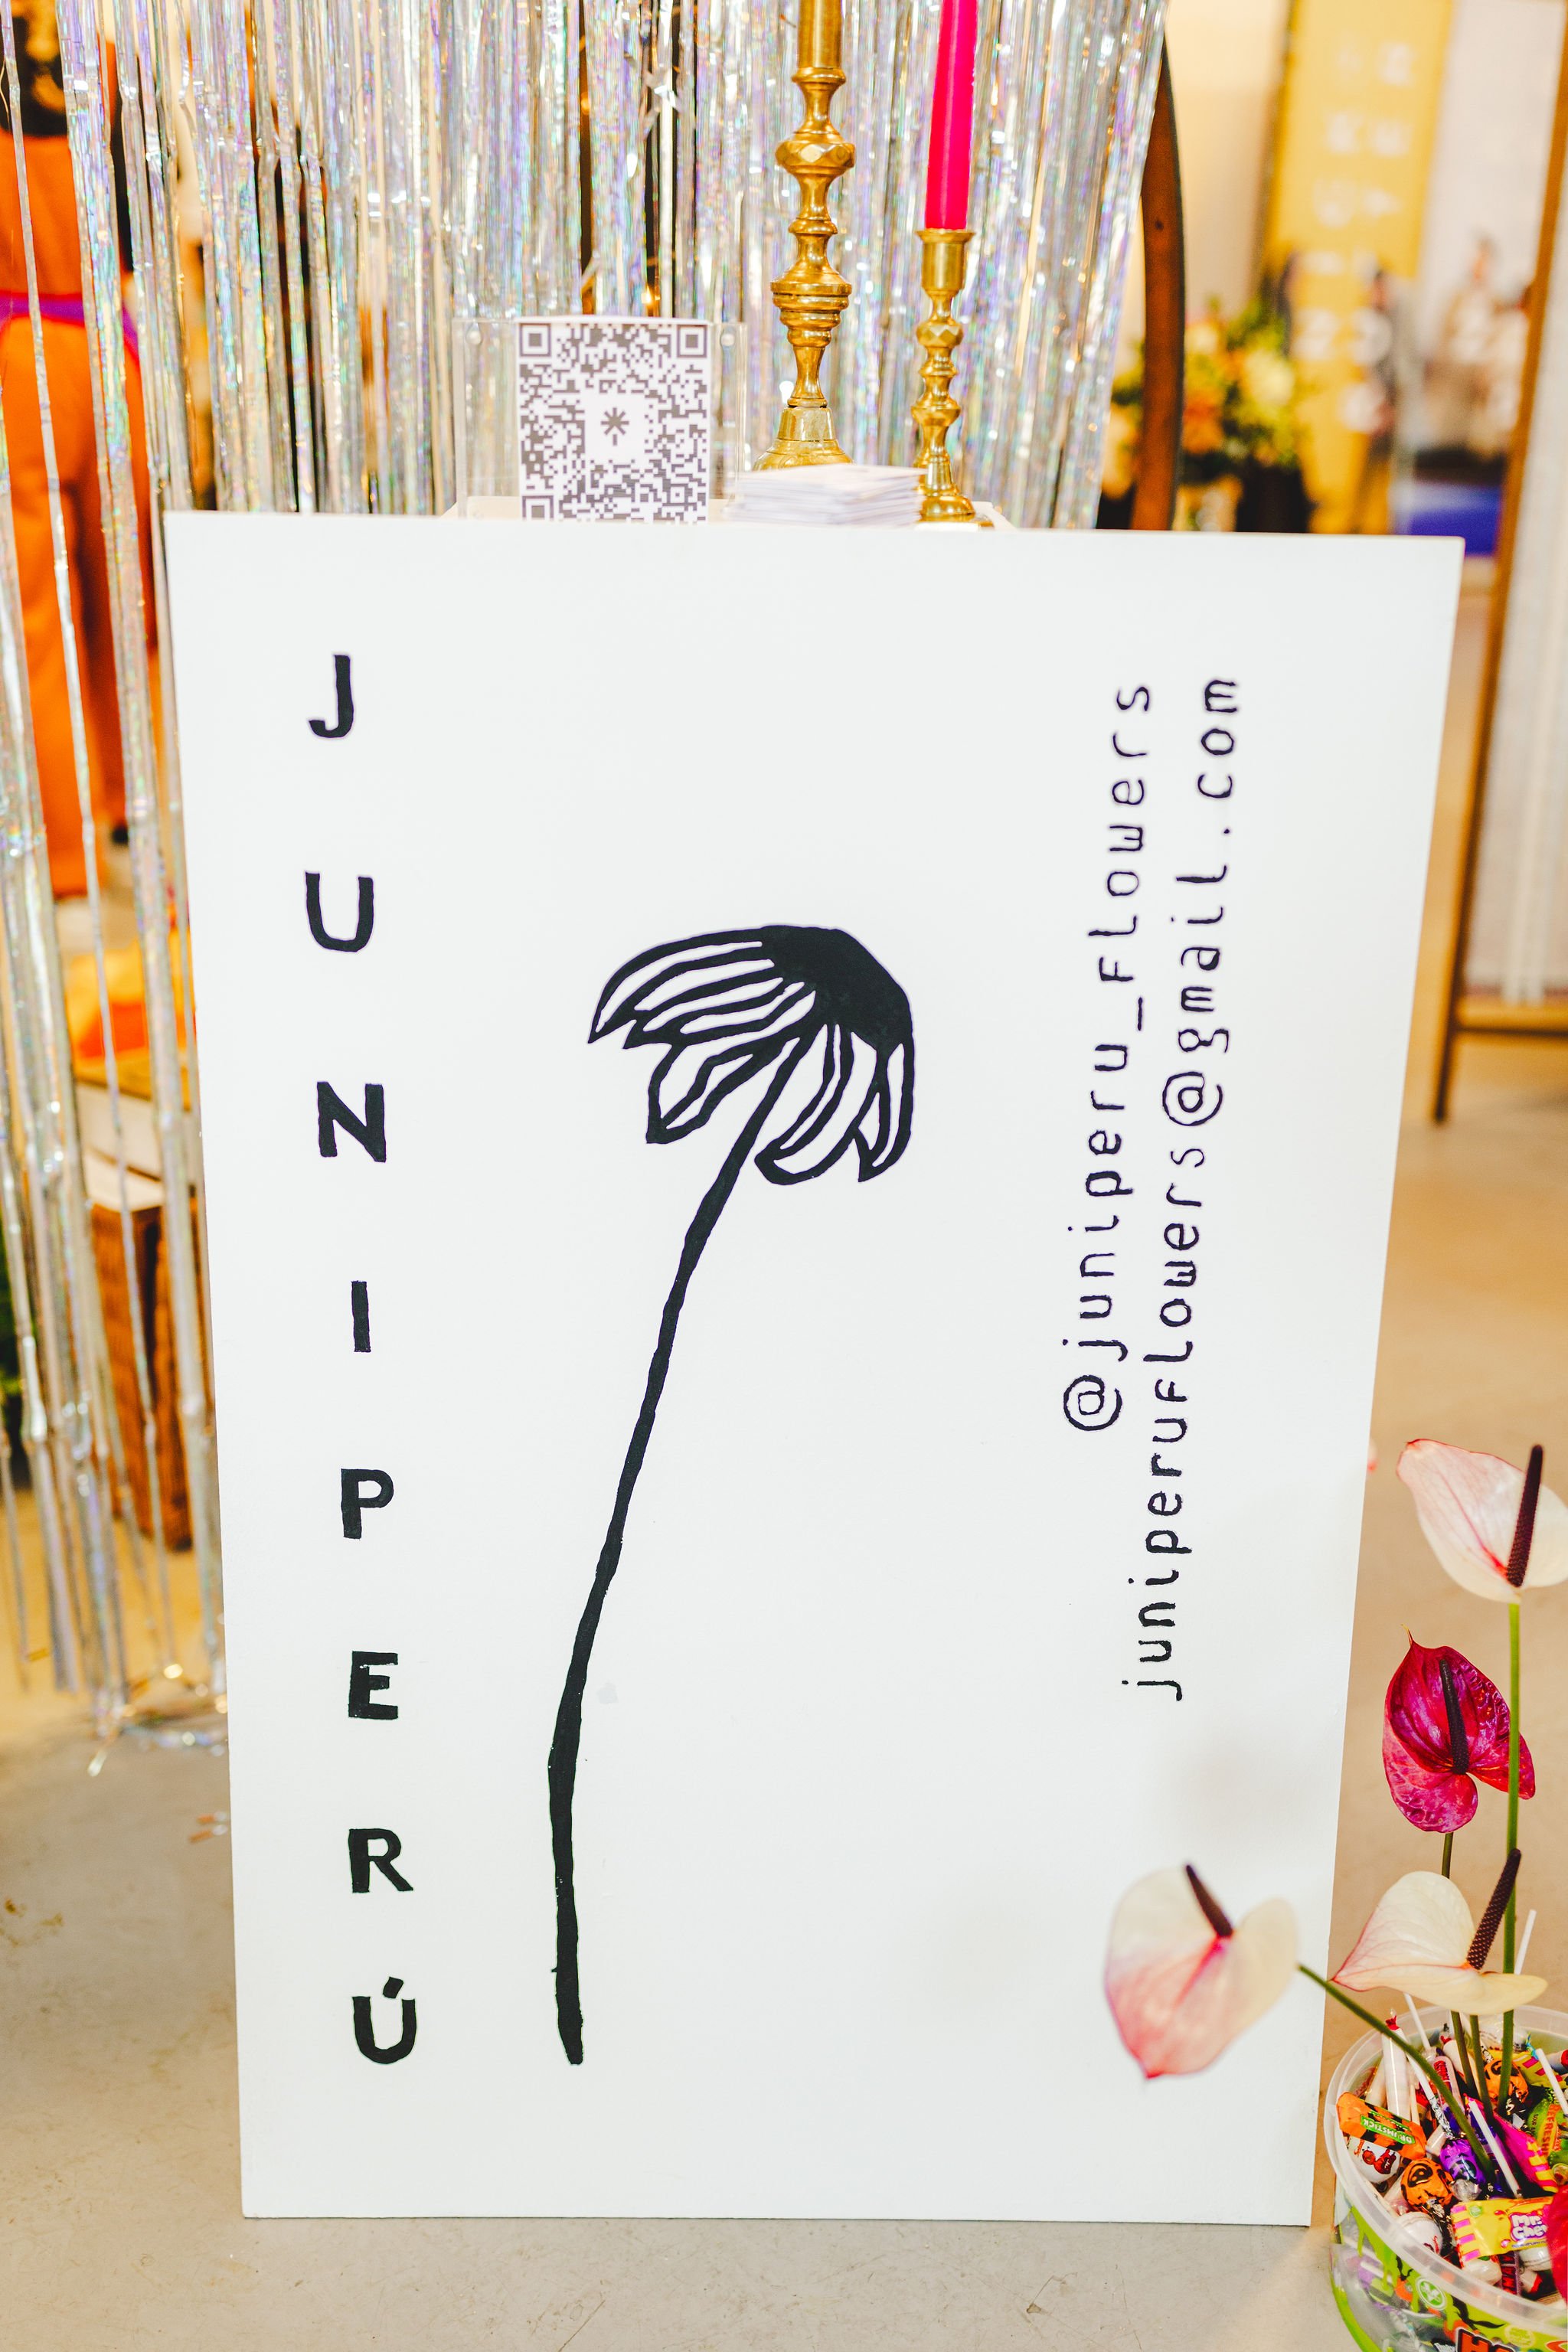  Hand painted sign by owner of Juniperu, a modern floral designer for weddings, displayed at The Un-Wedding Show Bristol. 